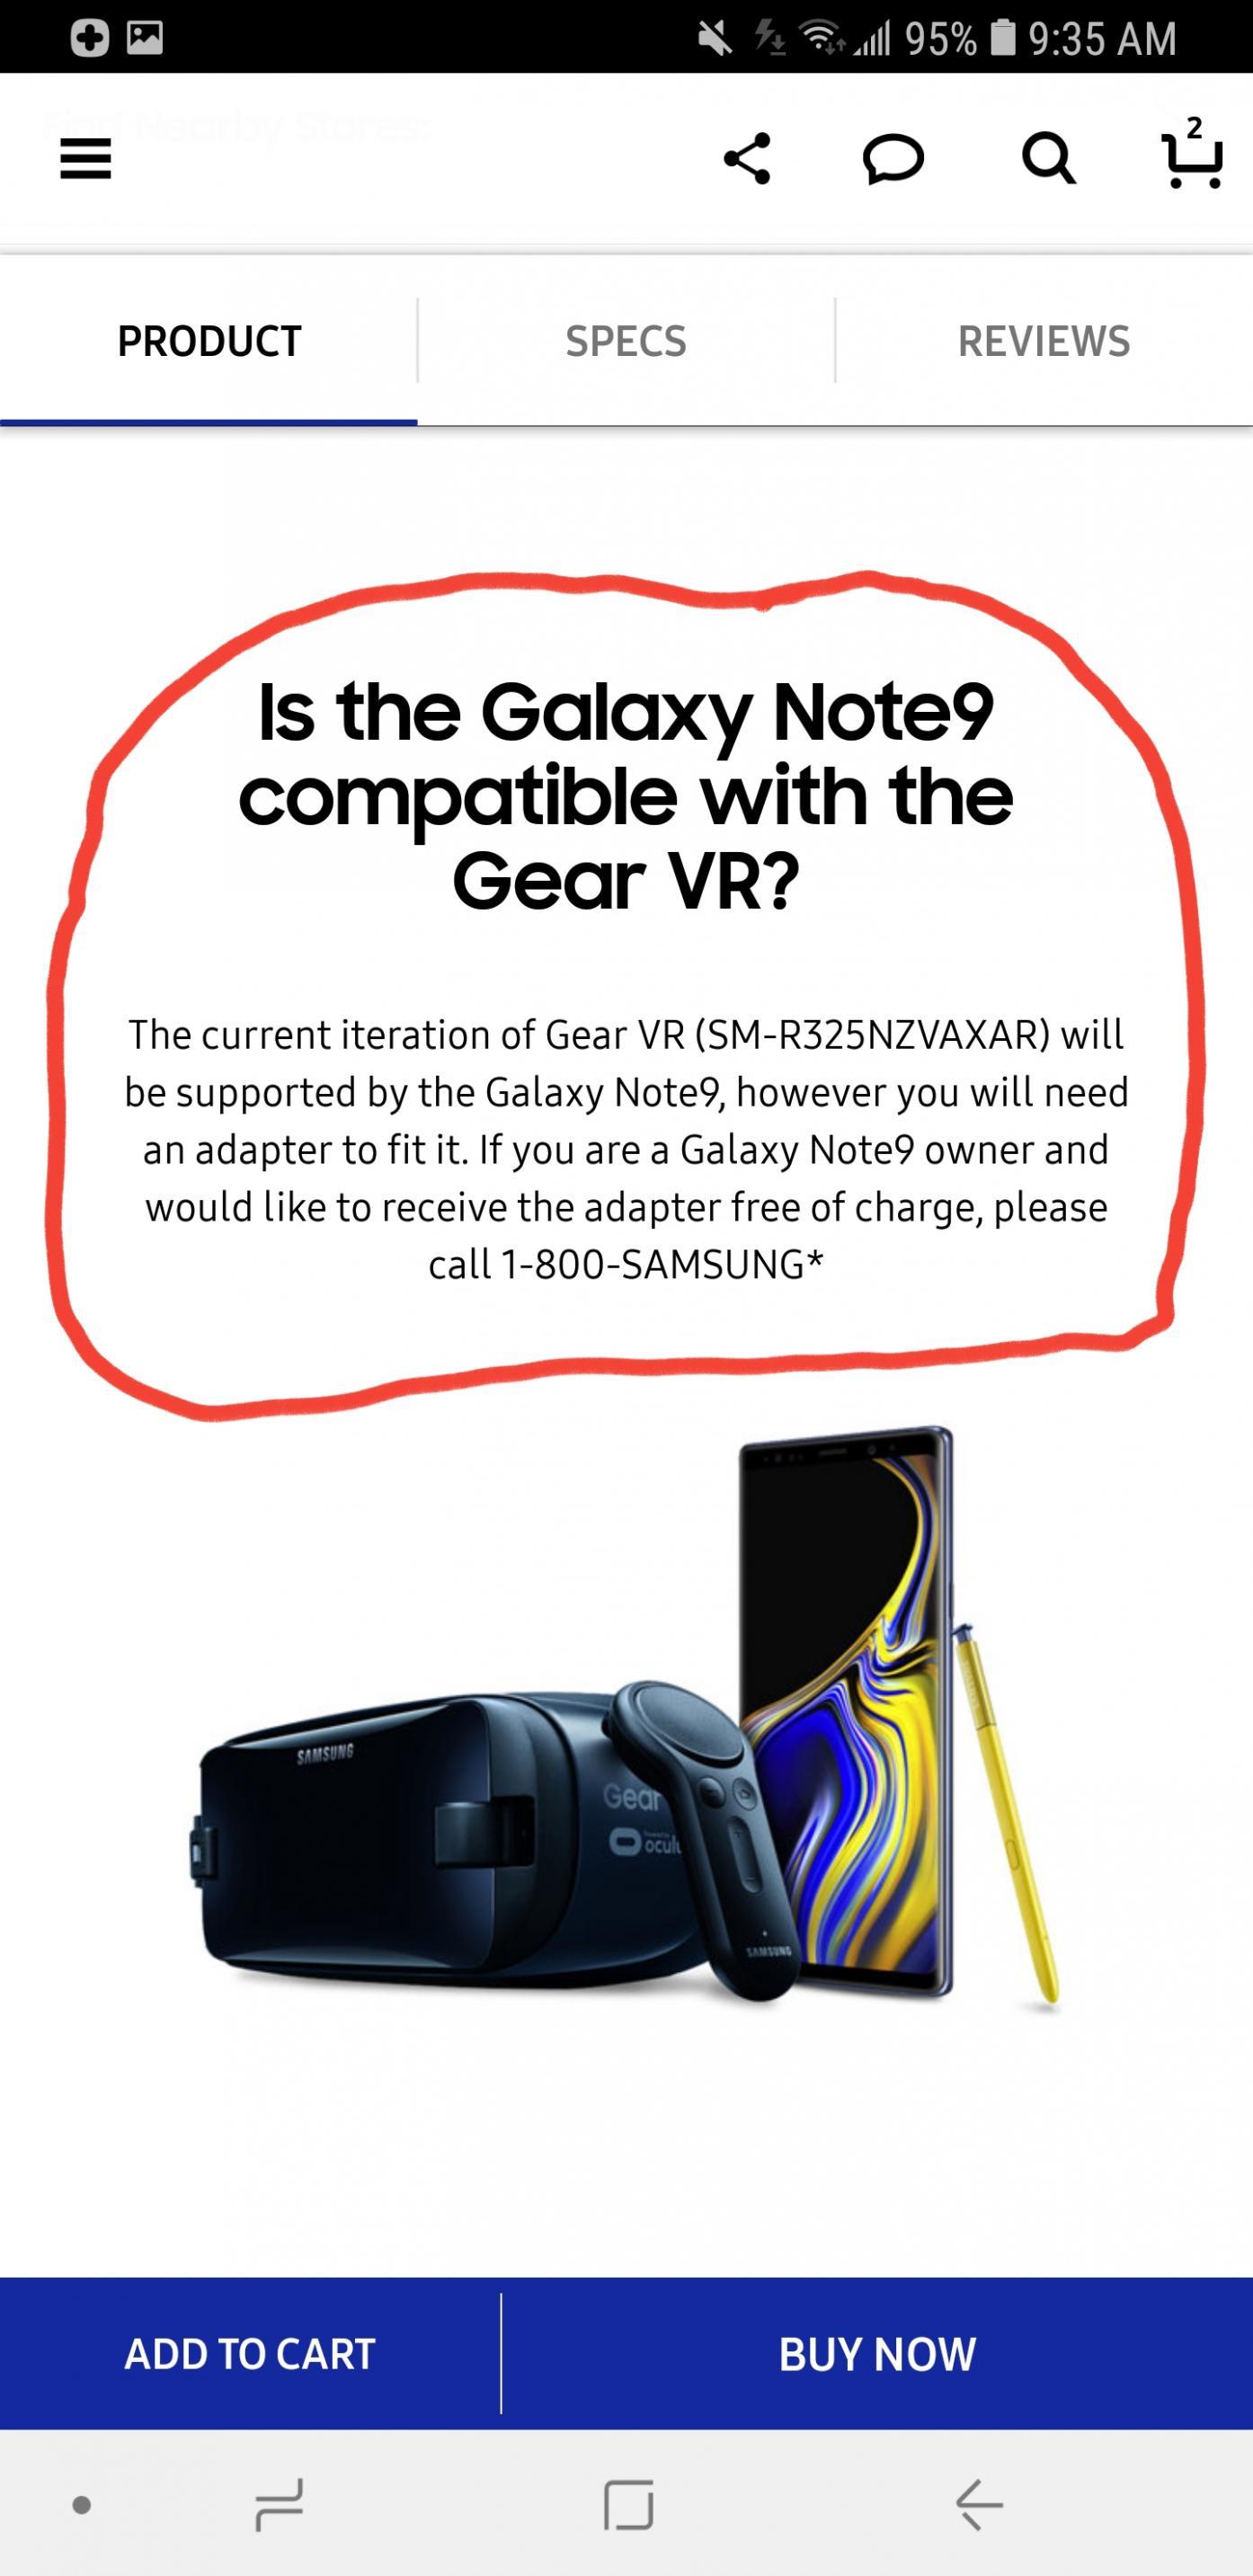 Samsung Galaxy Note 9 and the current Gear VR don't work together, but there's a workaround